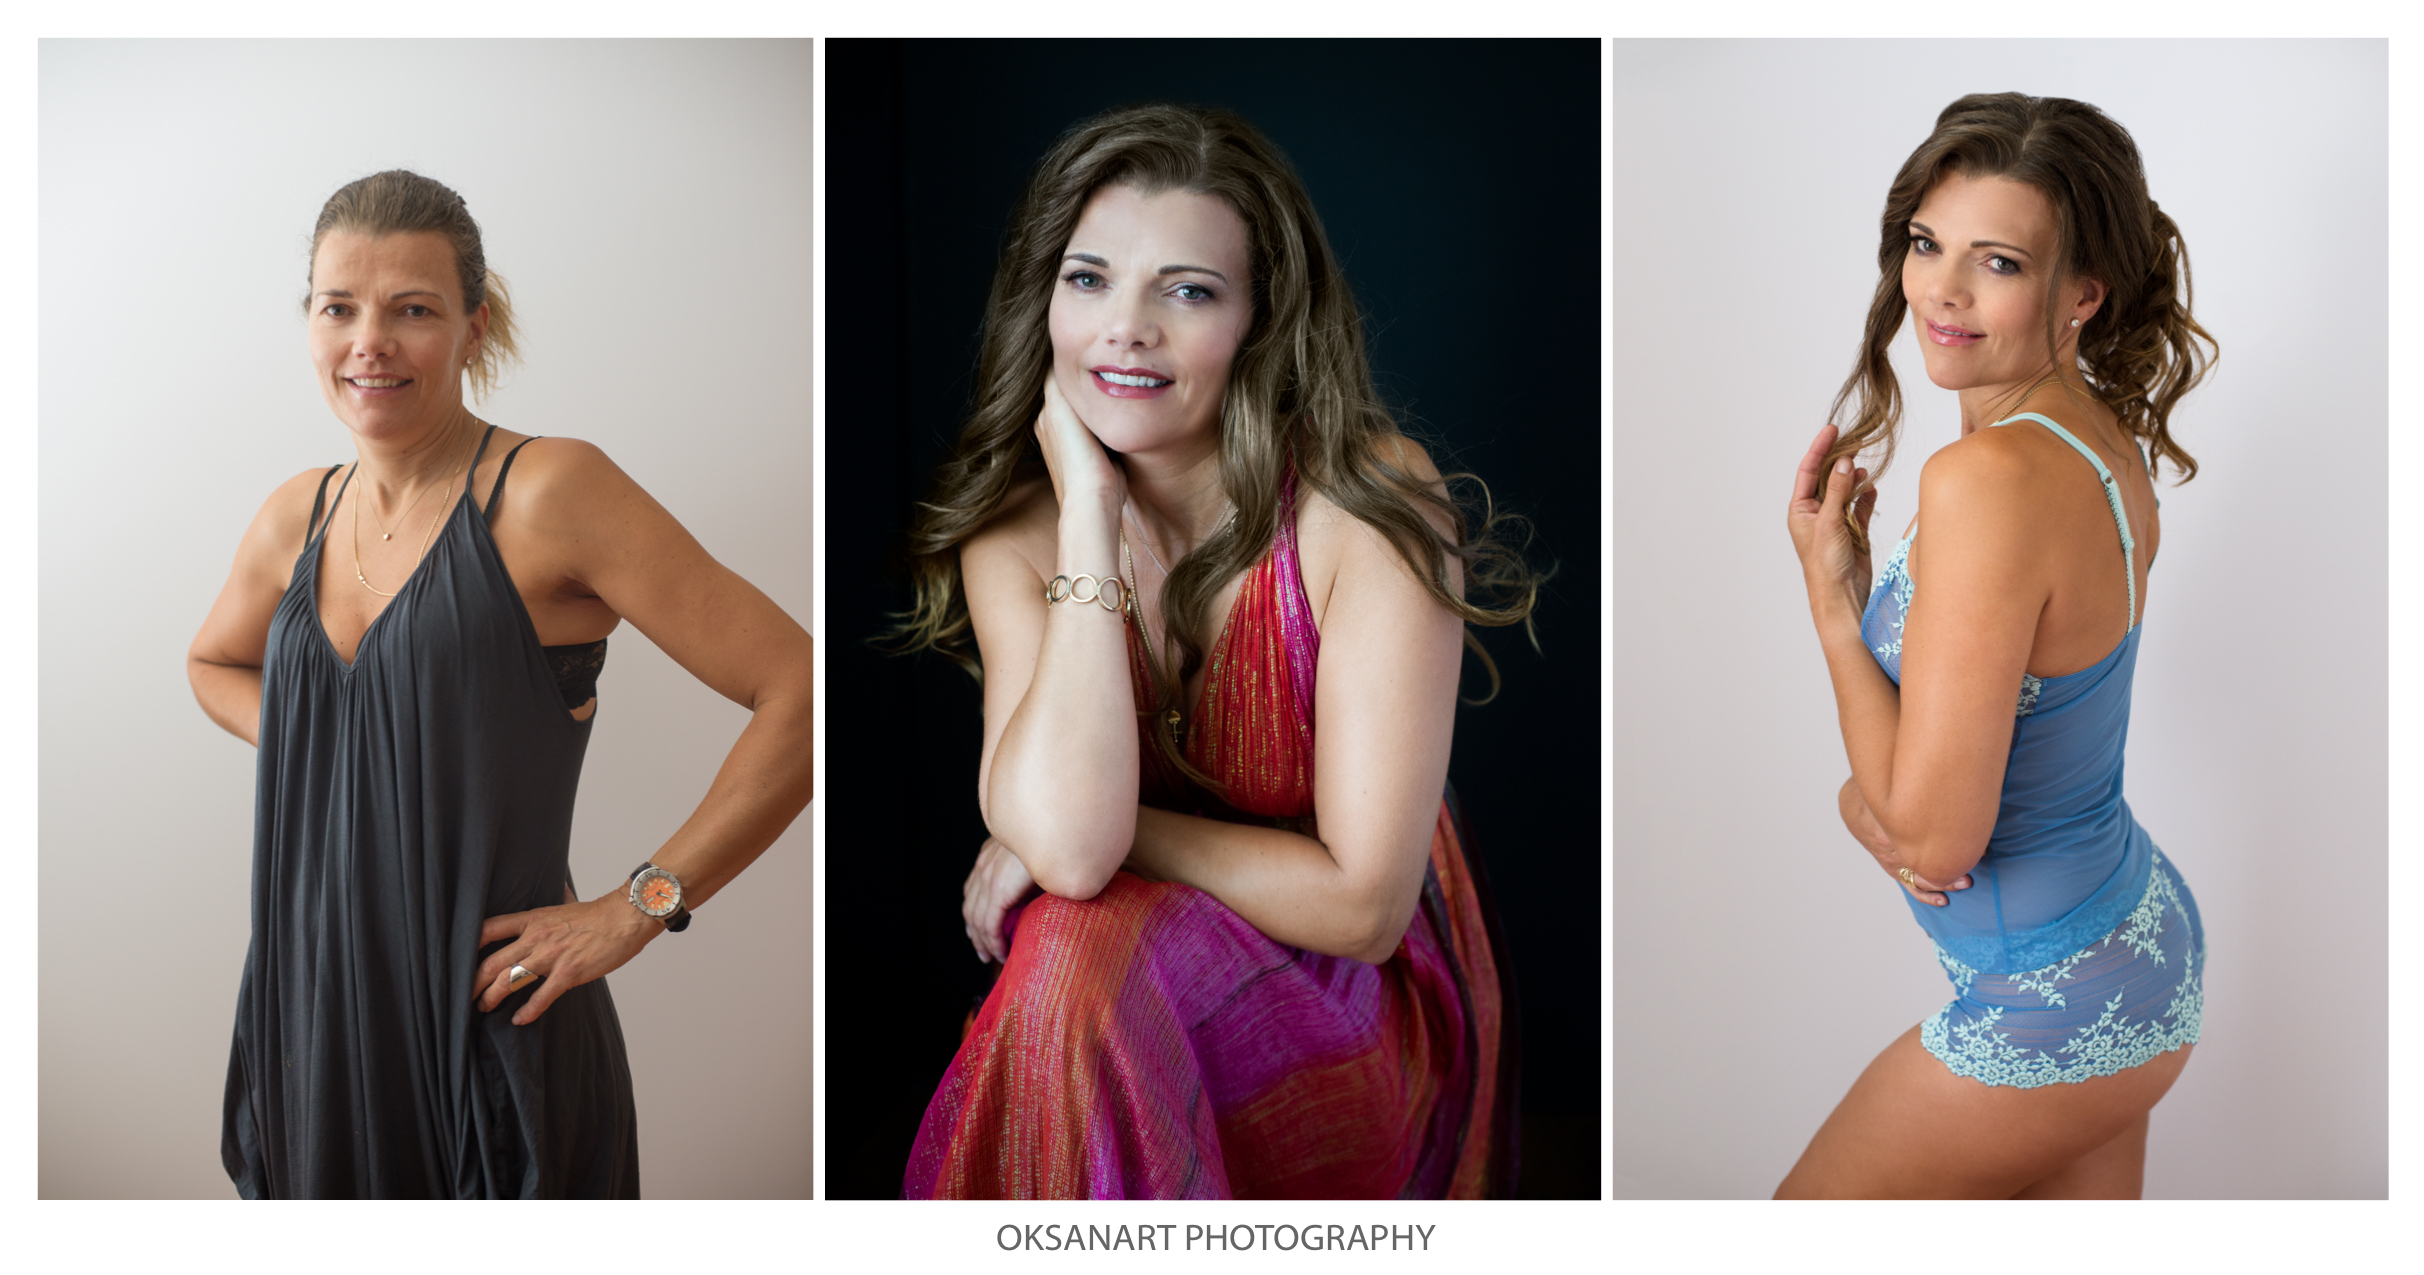 Oksanart_glamour_boudoir_photography_before and after_inland empire.jpg